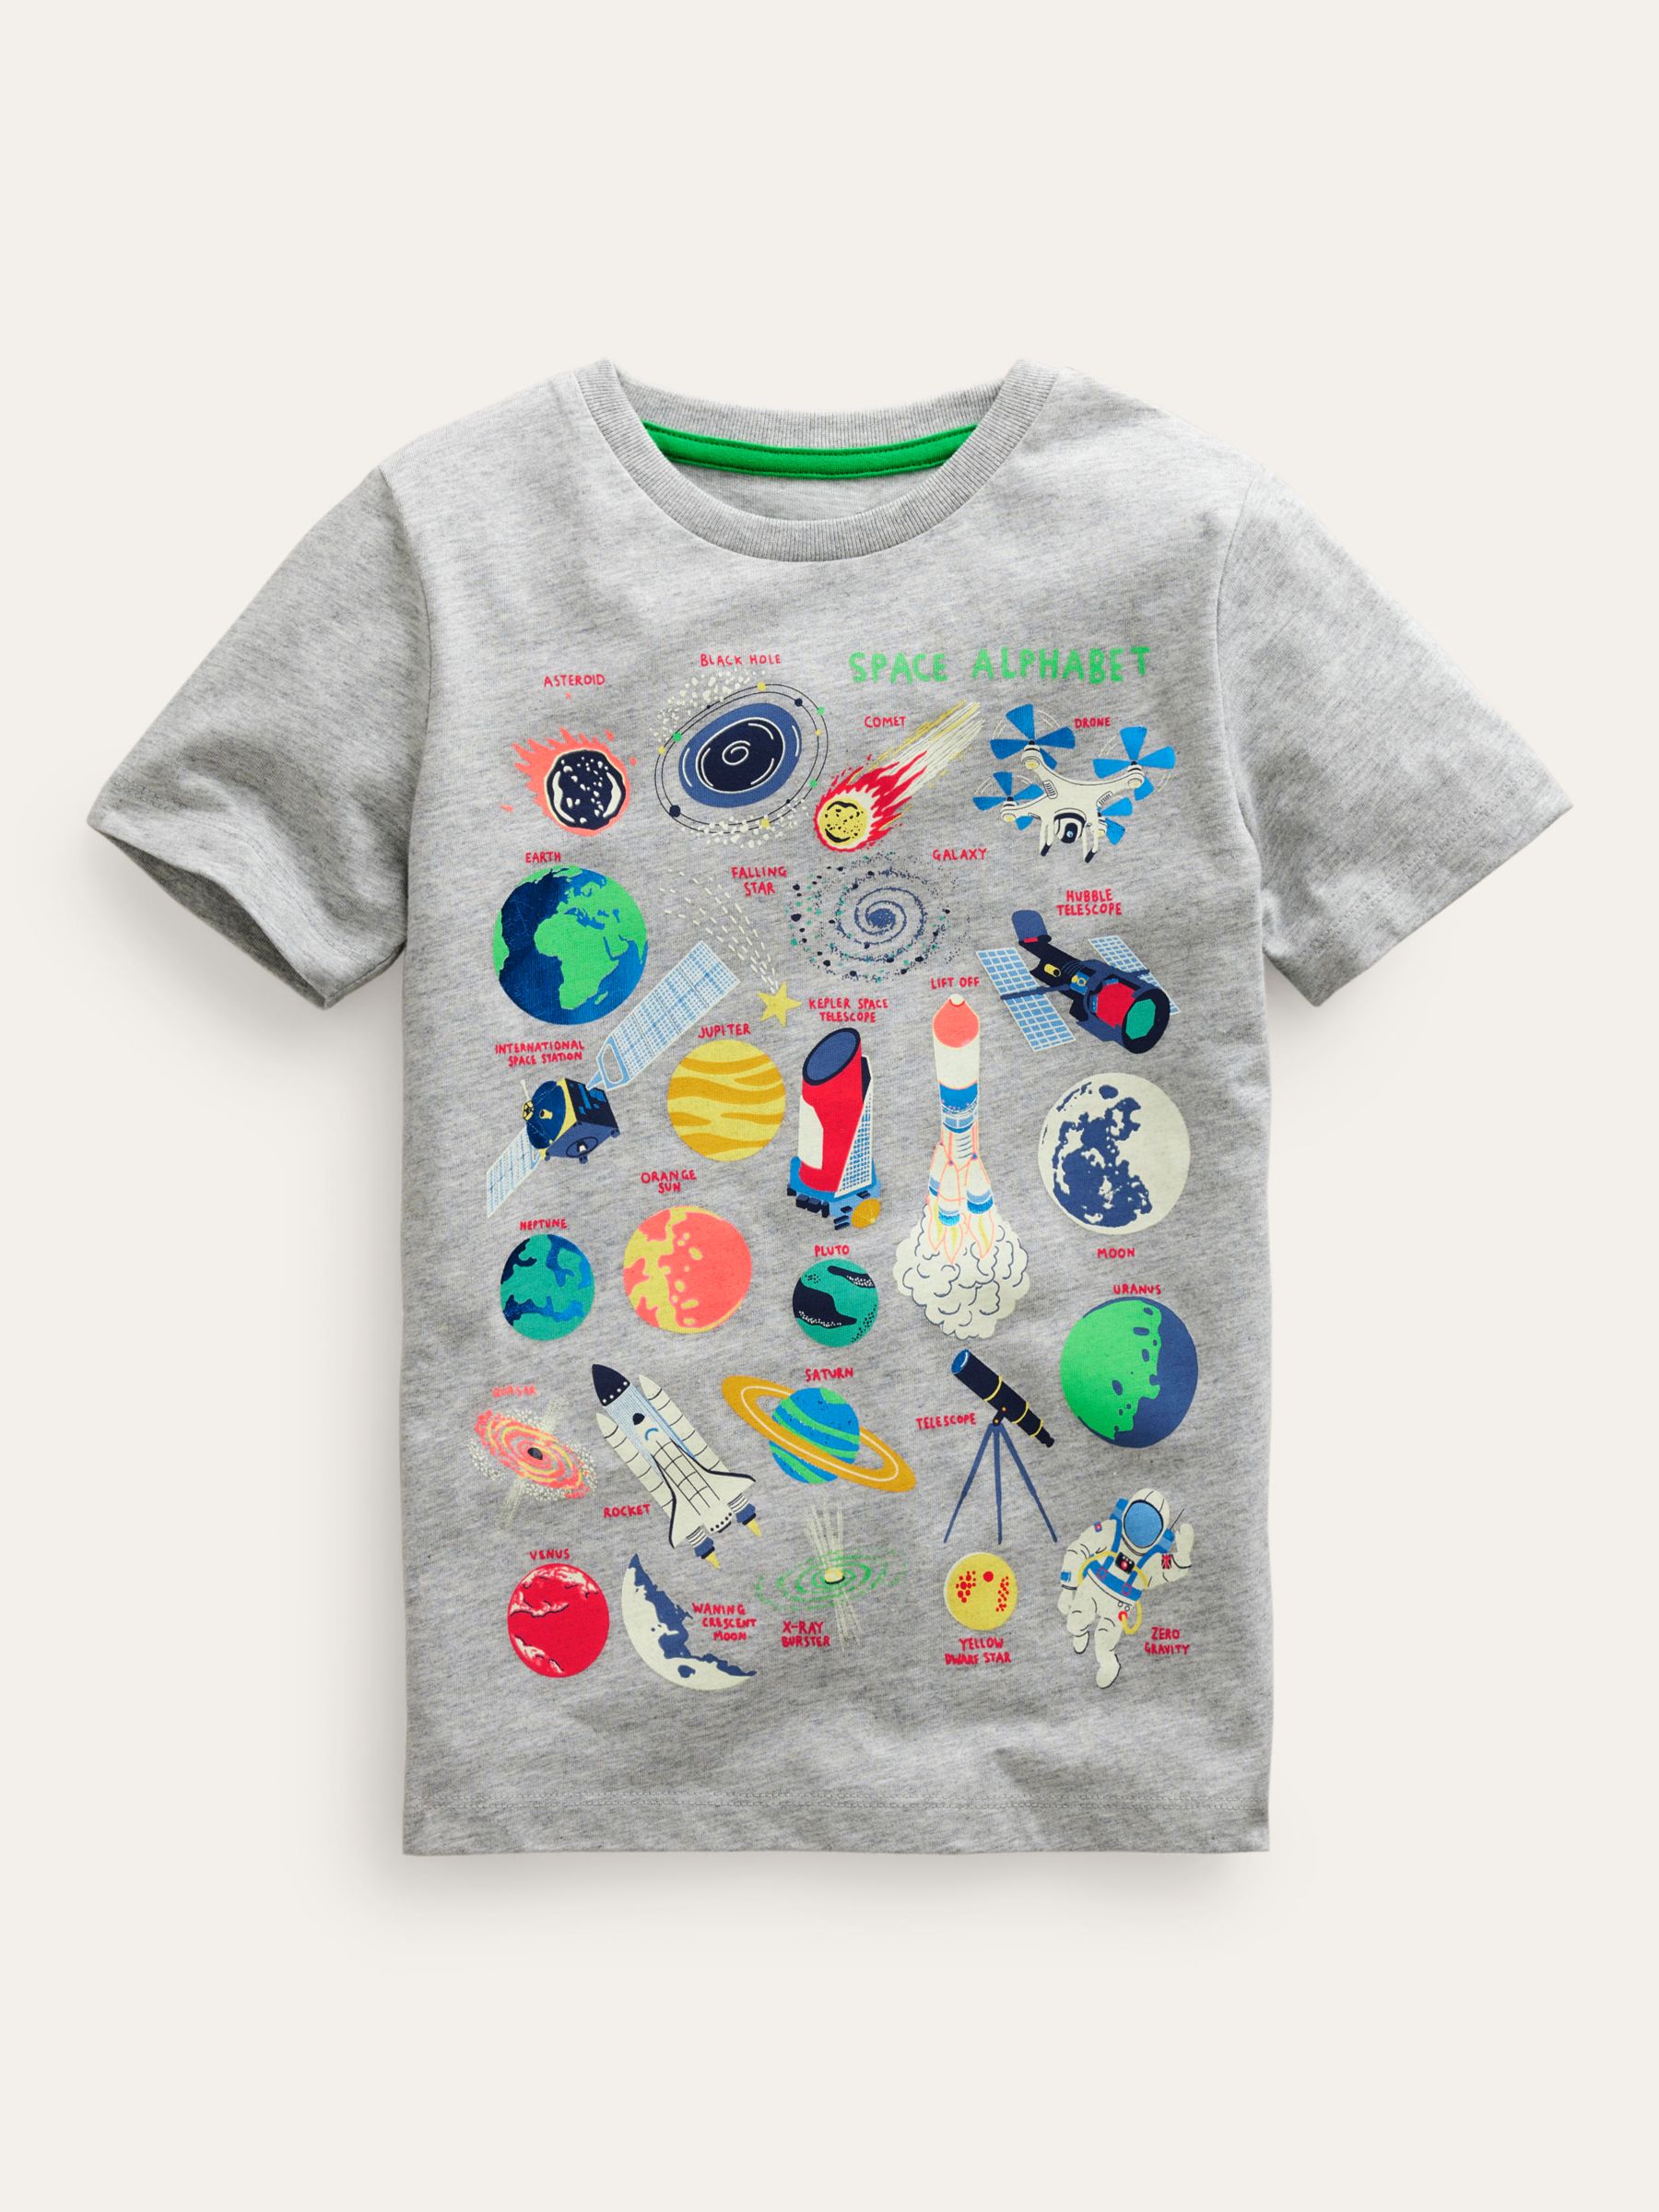 Mini Boden Kids' Glow-In-The-Dark Space Educational T-Shirt, Grey Space Alphabet, 2-3 years